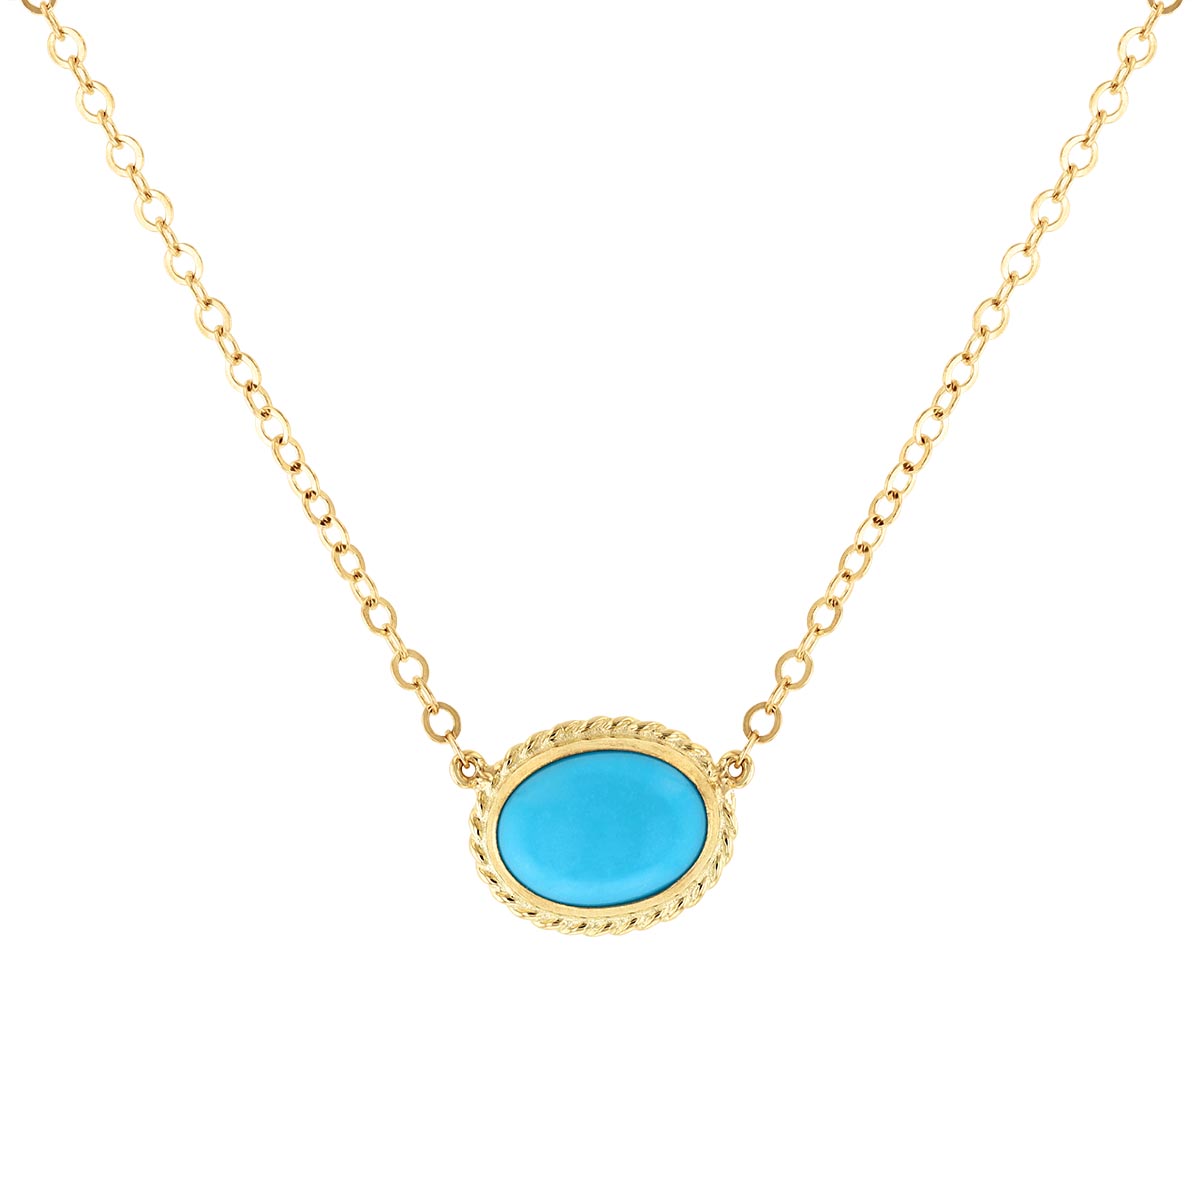 Macy's Genuine Sleeping Beauty Turquoise Pendant Necklace in 14k Yellow  Gold, 18